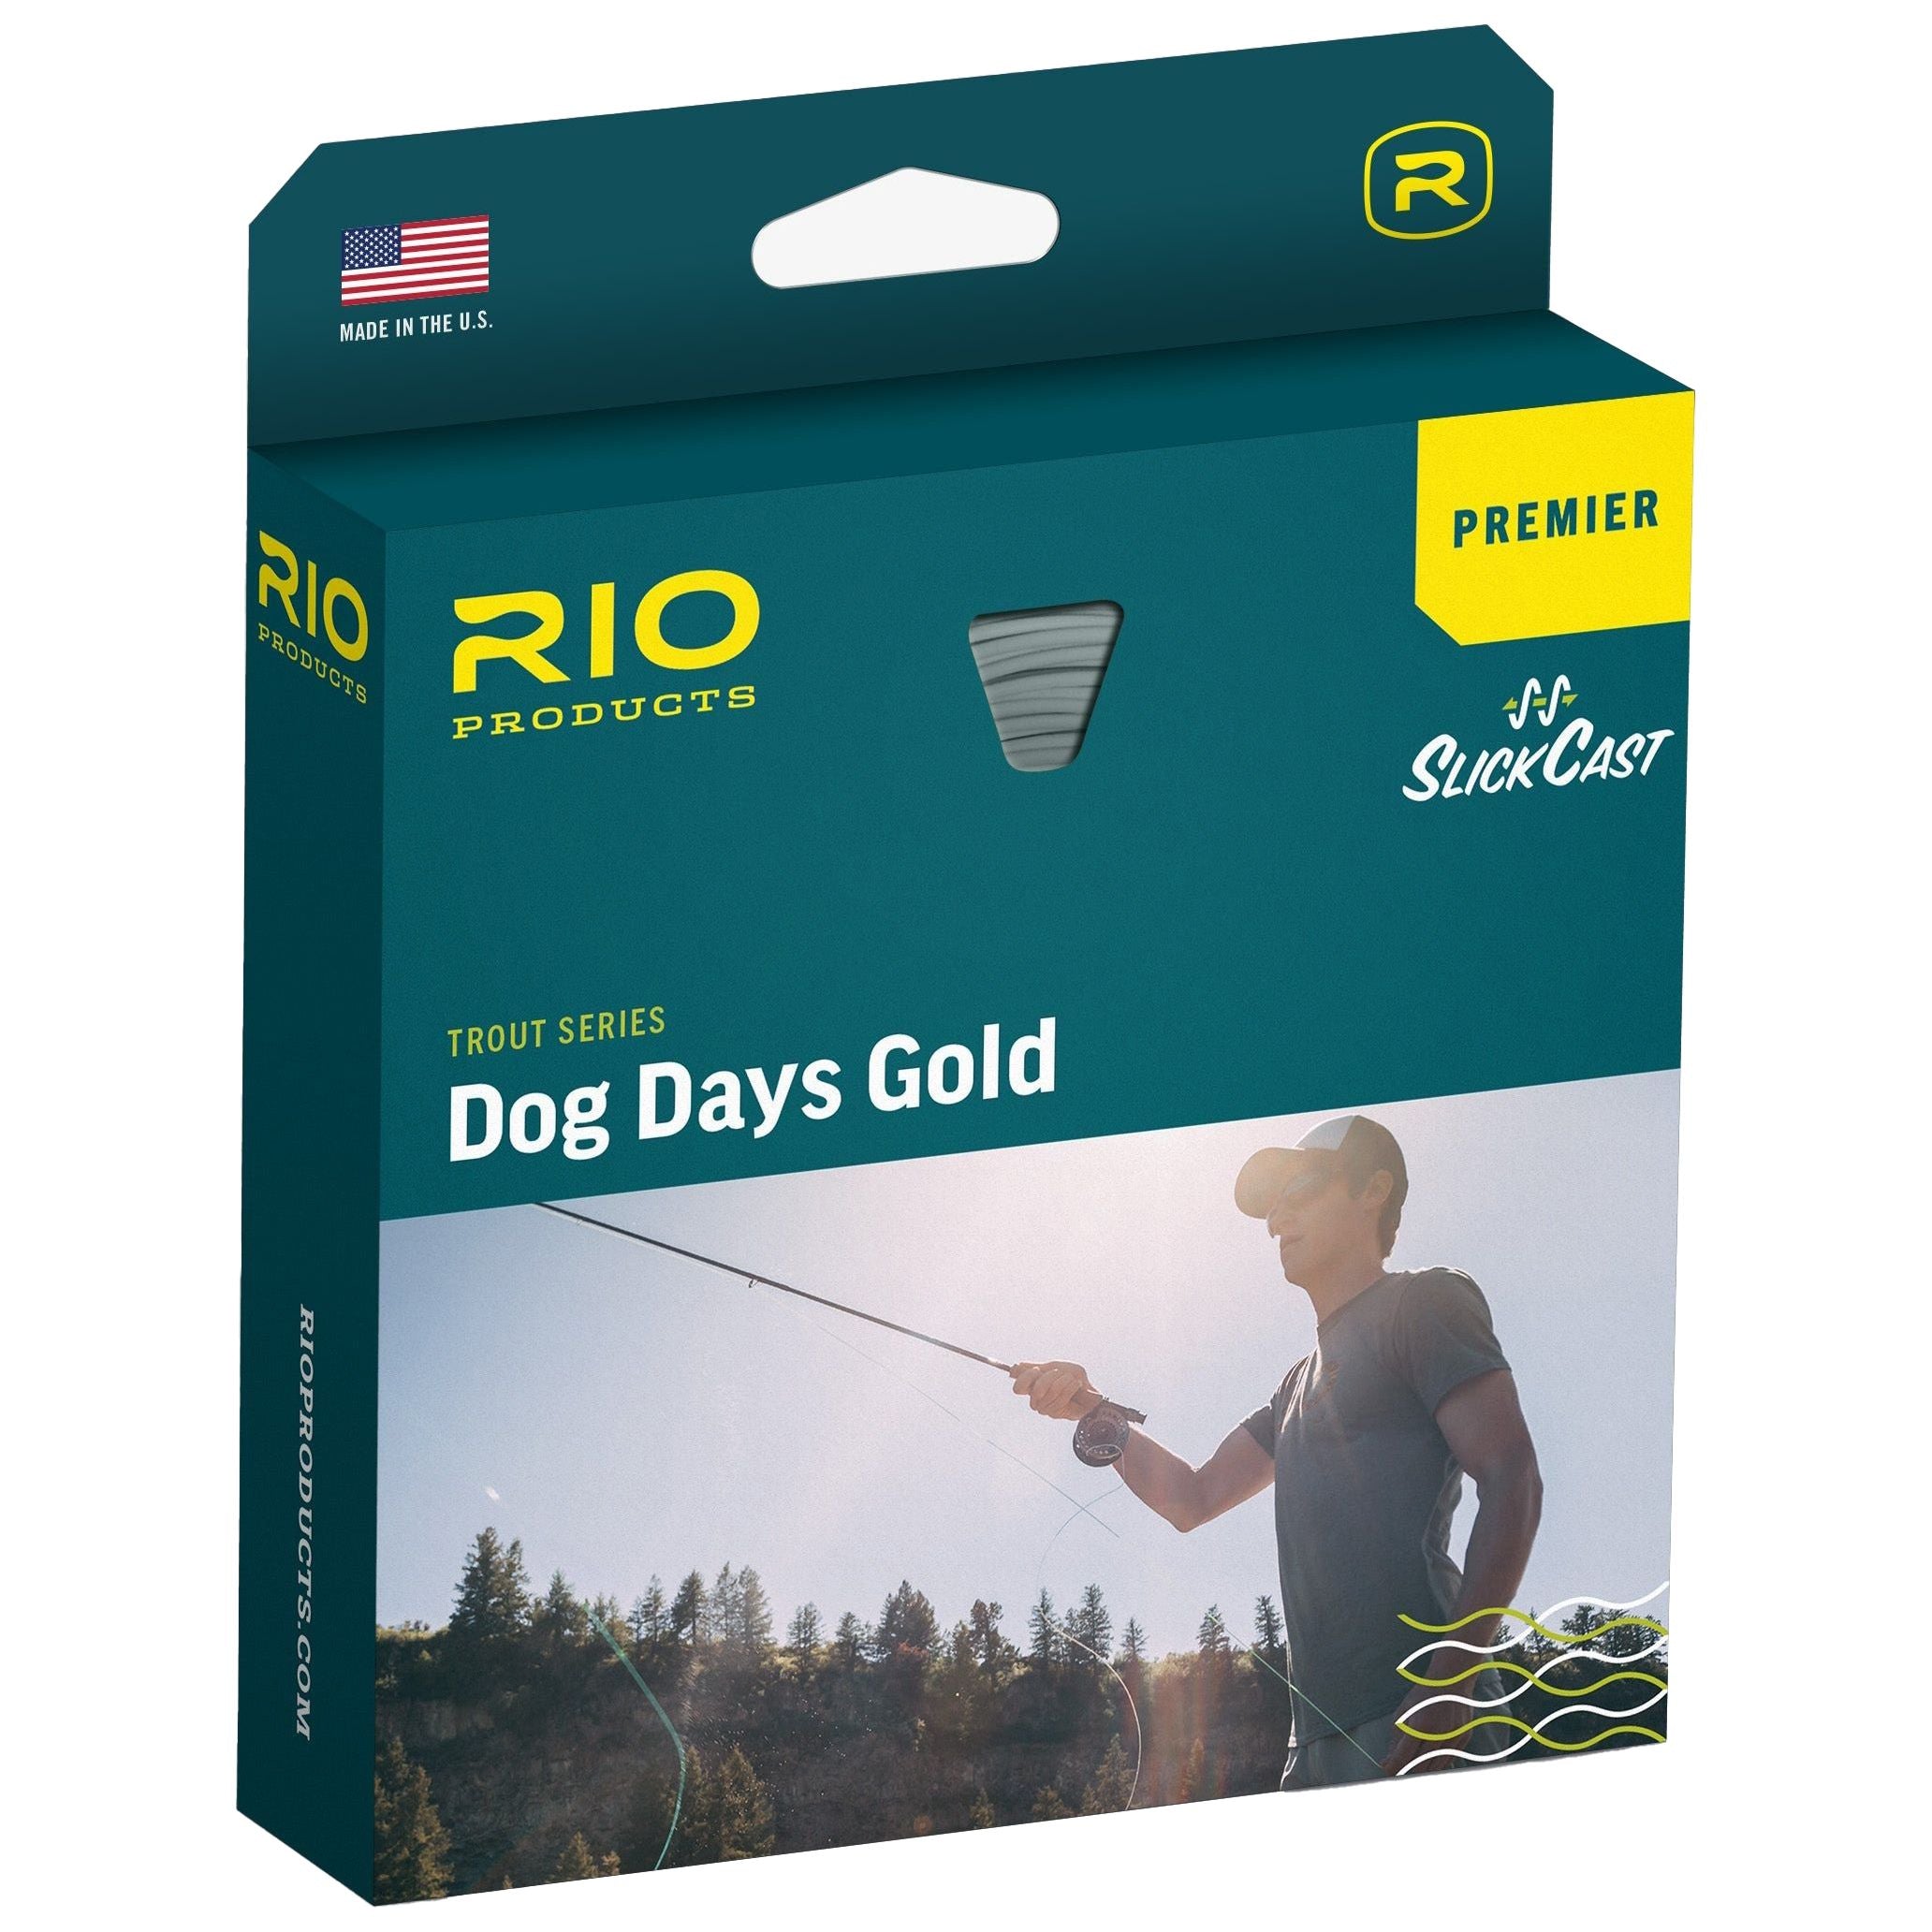 RIO Products Premier Dog Days Gold Image 01